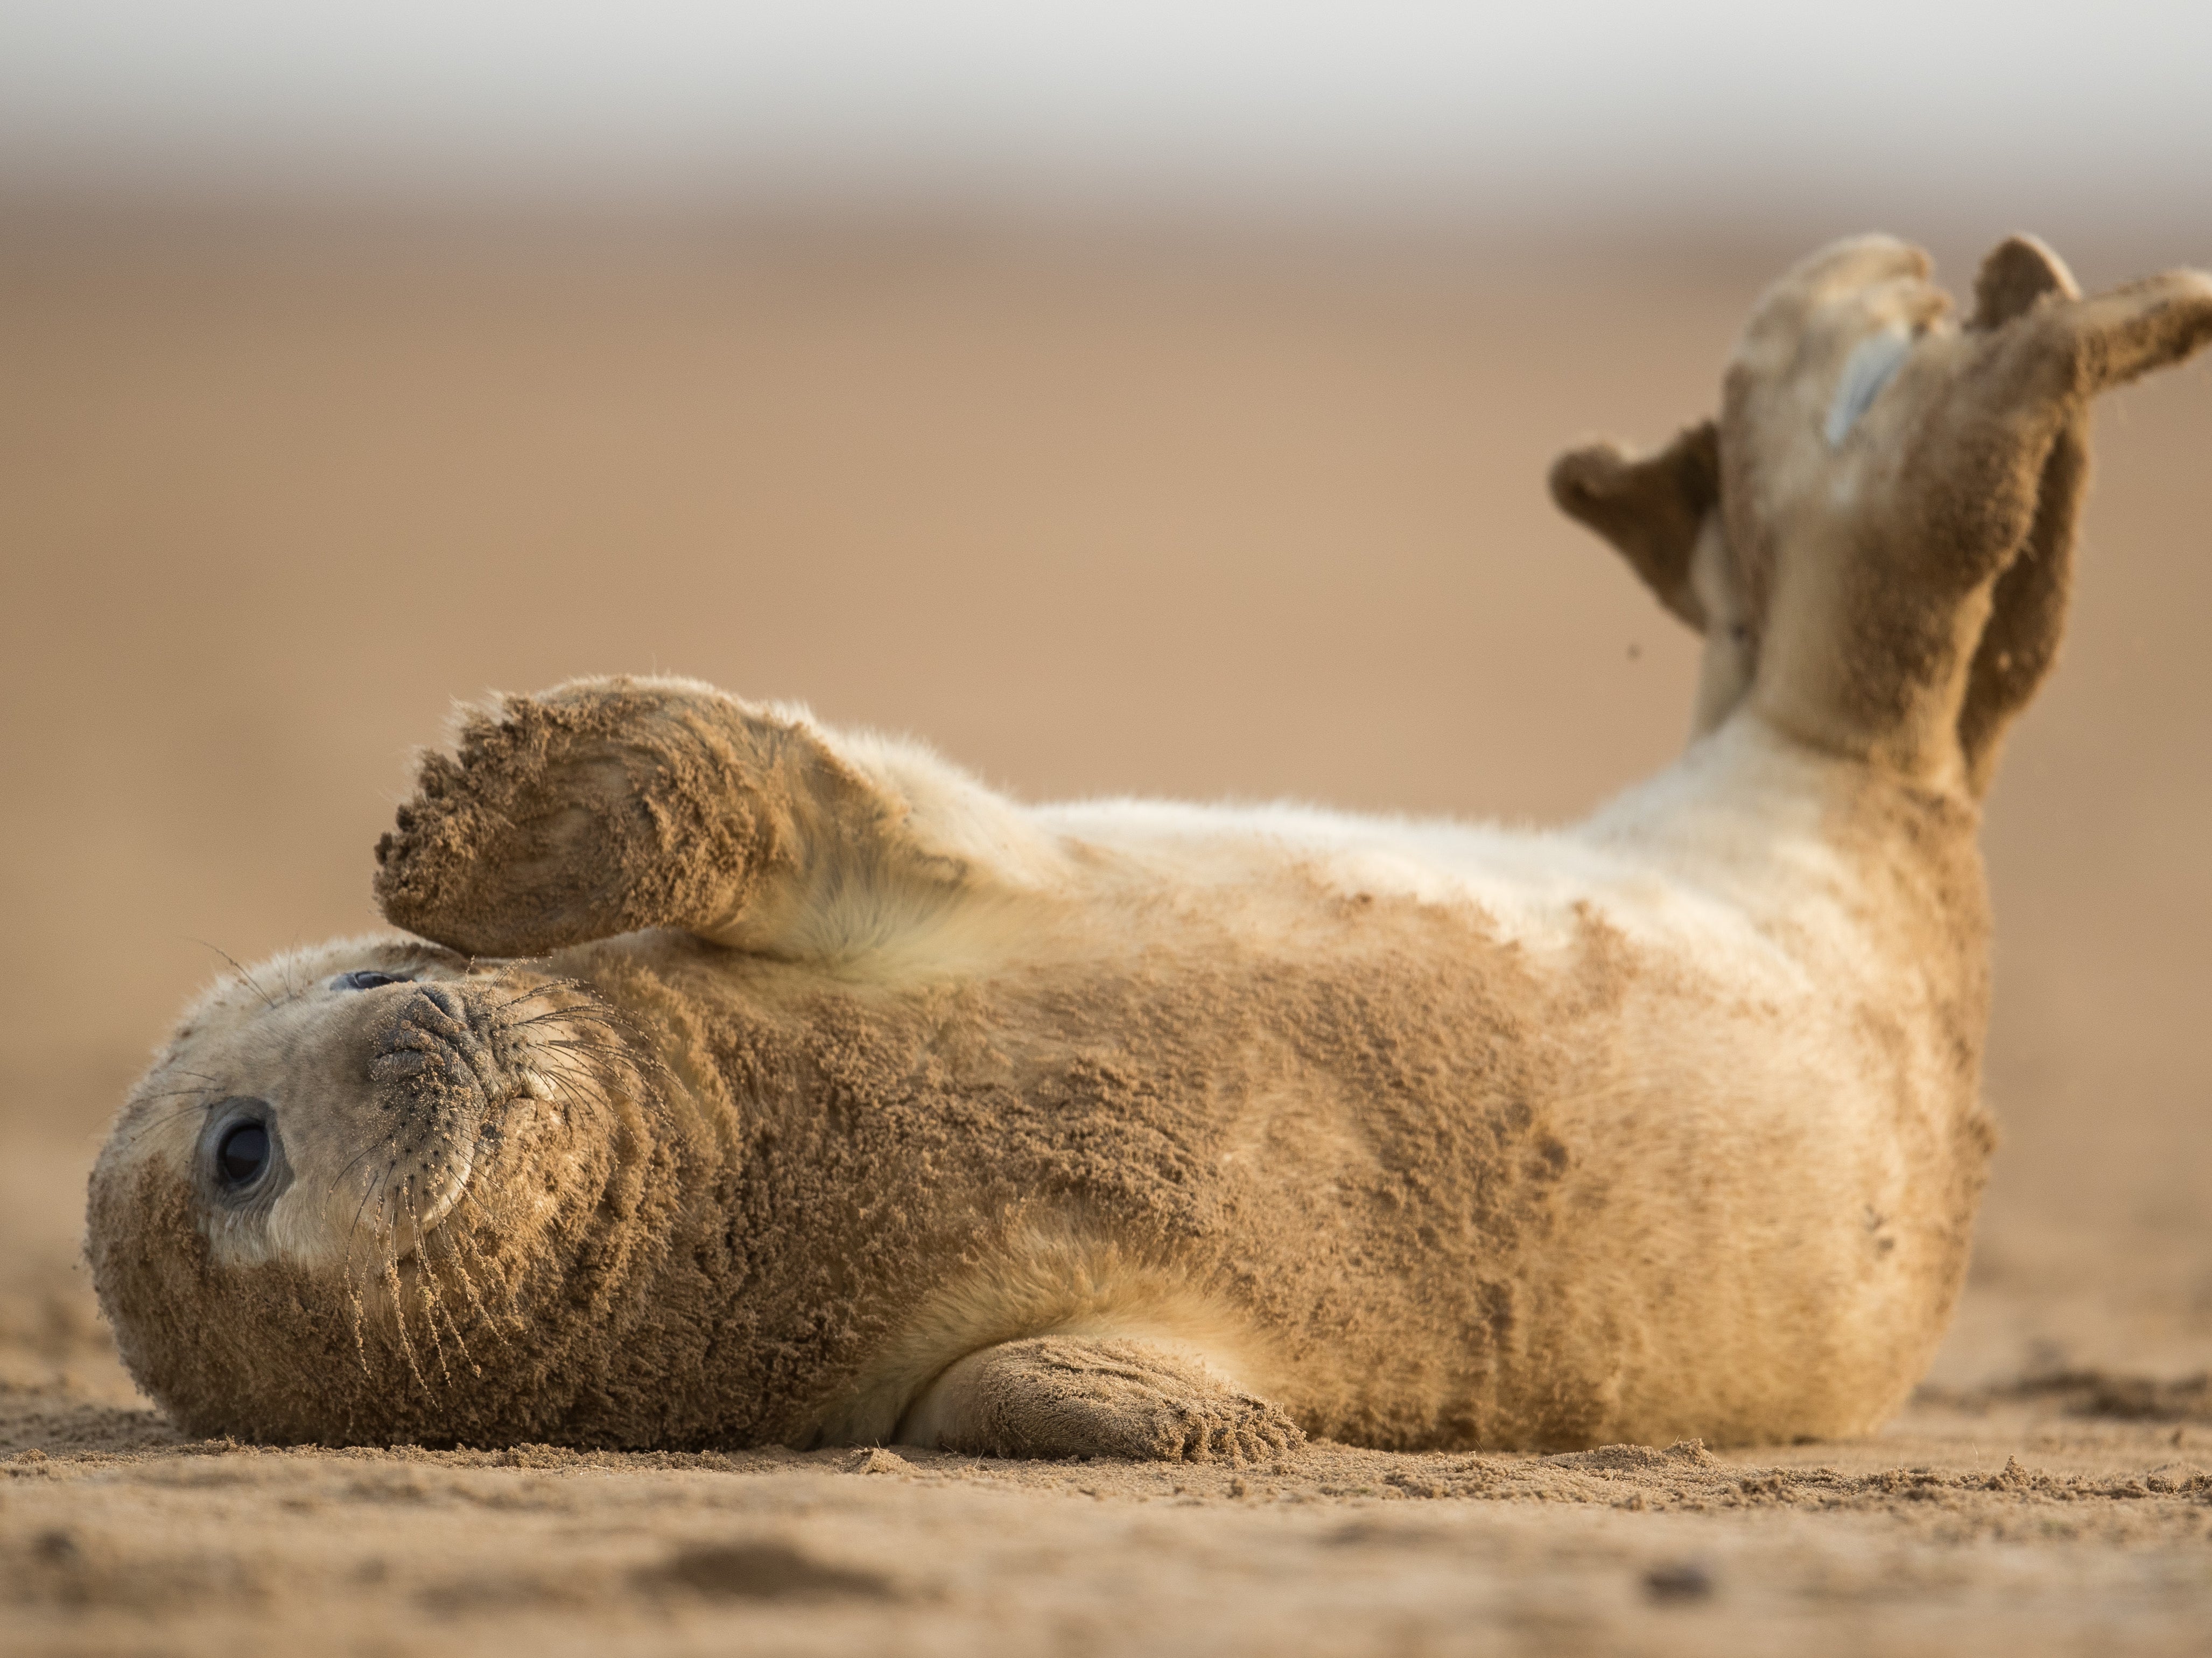 A grey seal pup rolls on the sand near the Lincolnshire Wildlife Trust’s Donna Nook nature reserve